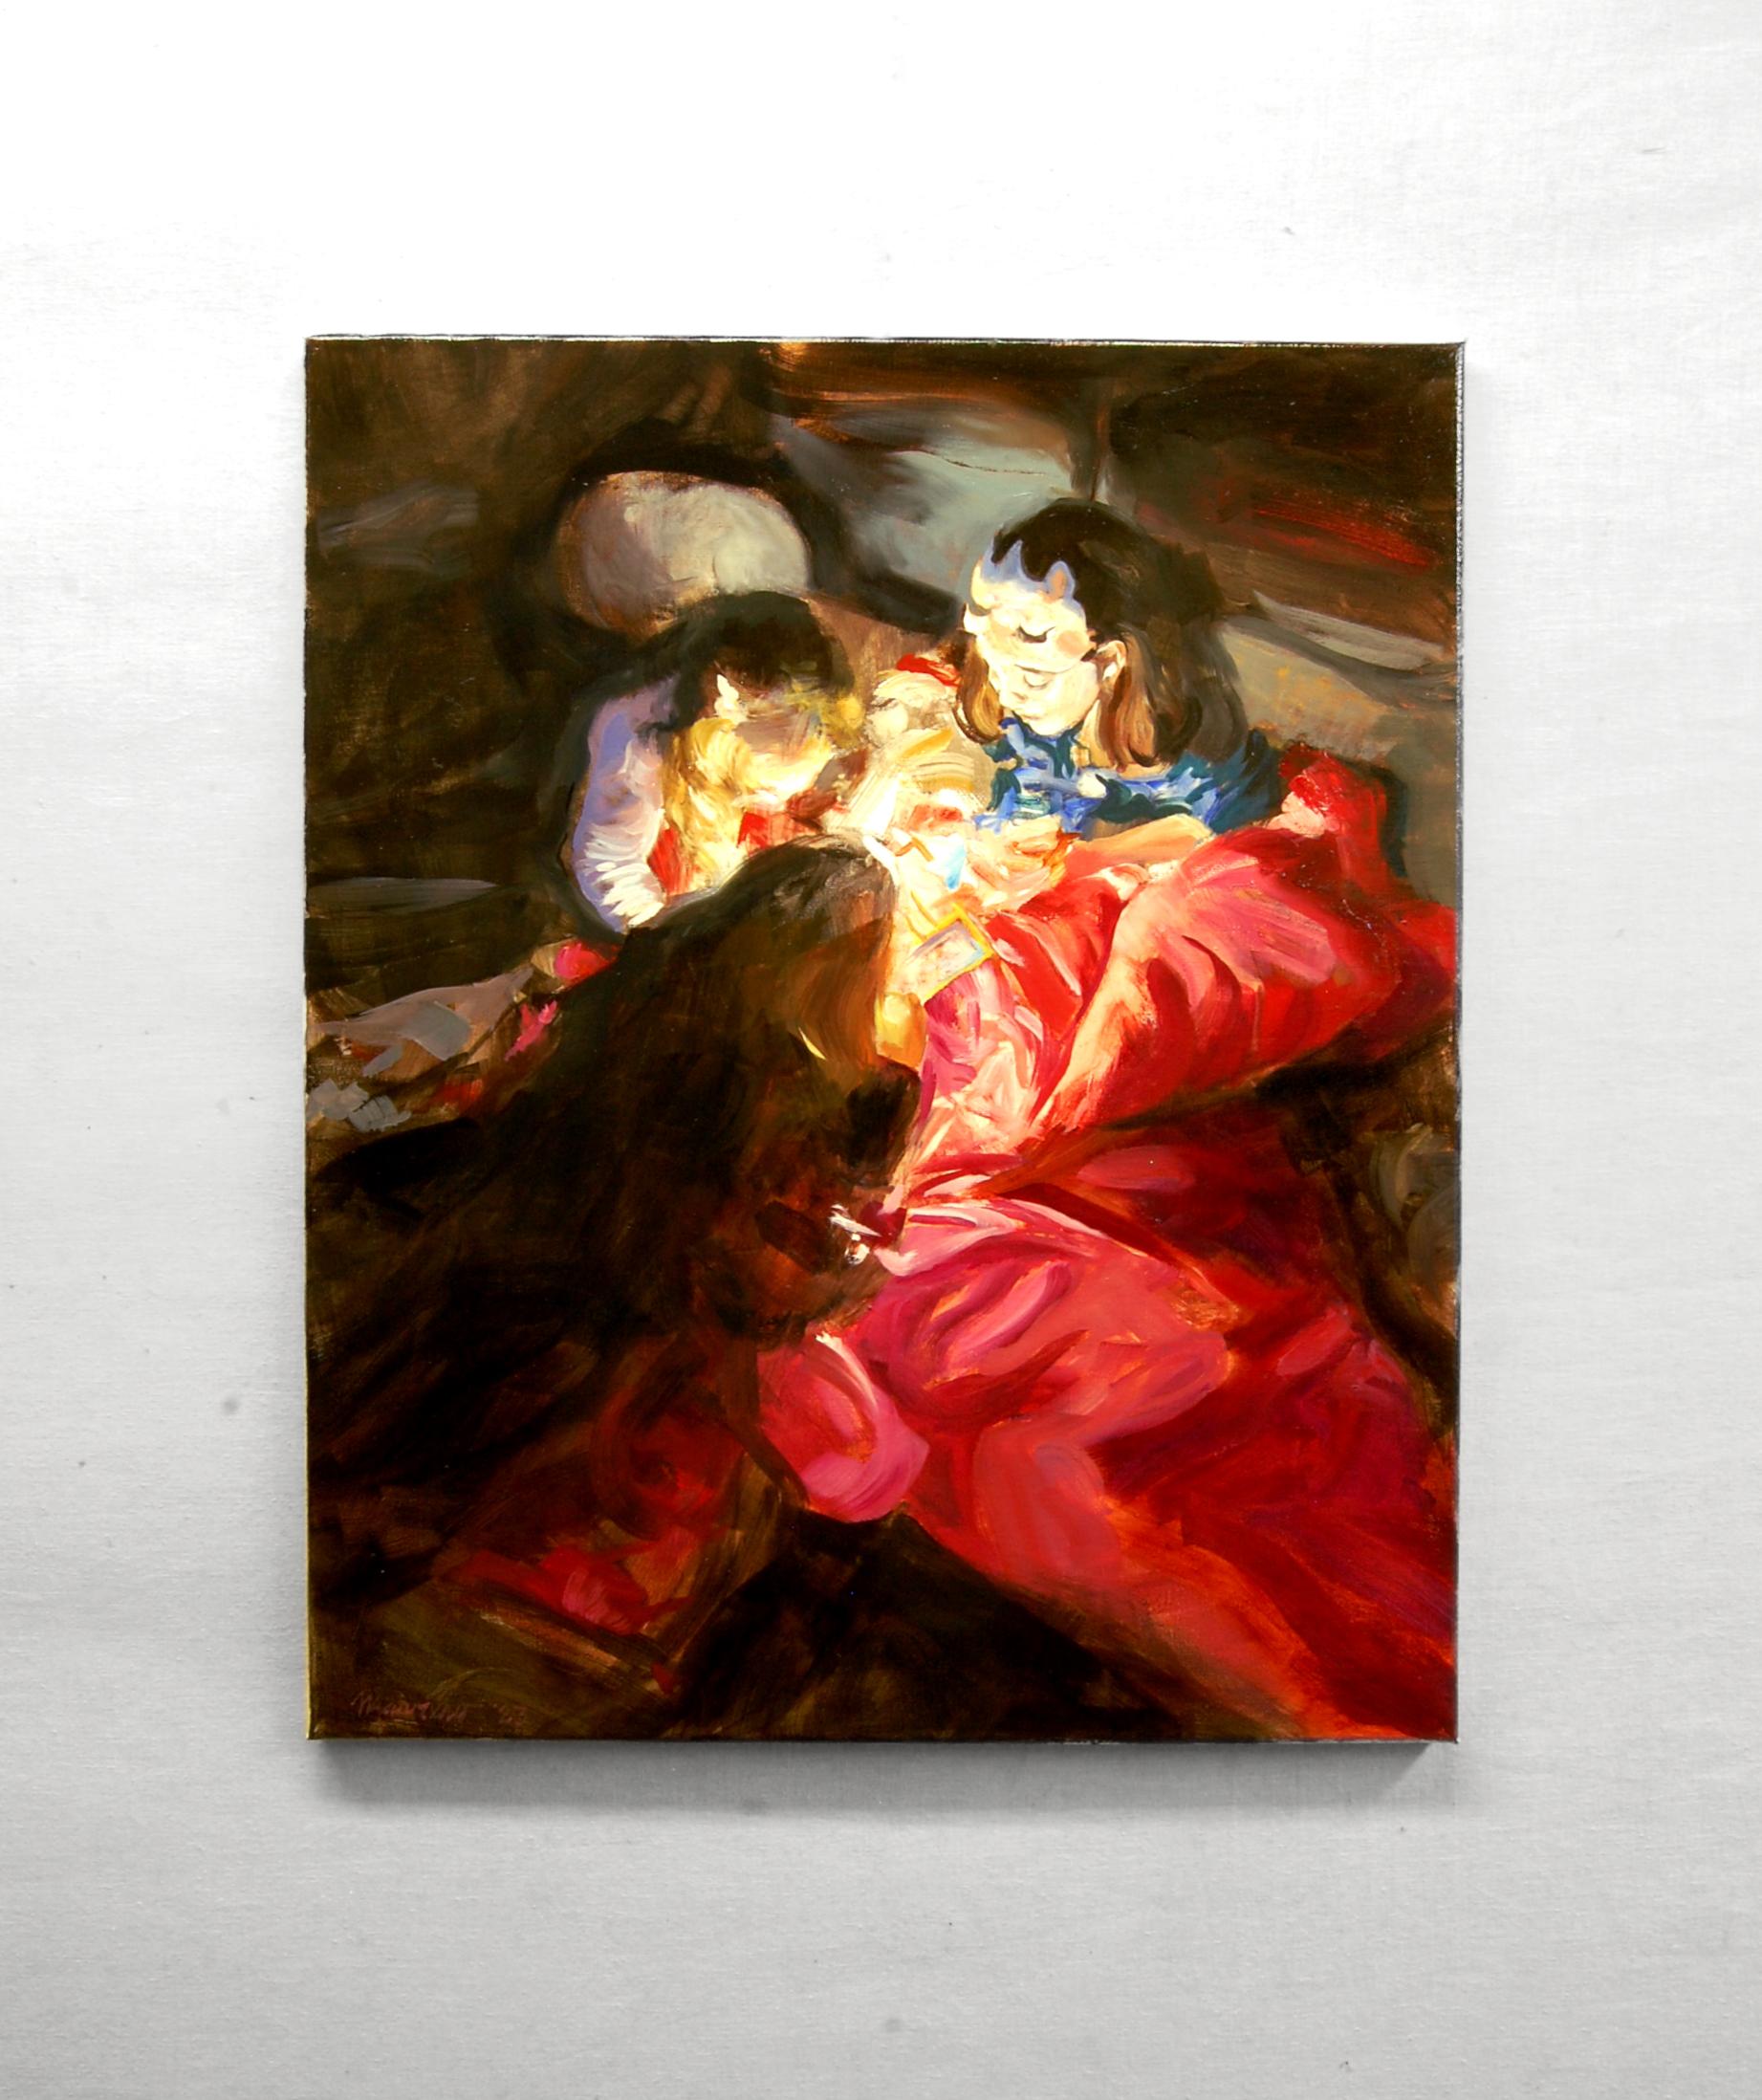 <p>Artist Comments<br>Artist Onelio Marrero displays the magic of three preteen young girls gathered around a flashlight during a recent sleepover. He captures the endearing moment at his oldest granddaughter's home. The heavy shadows and exciting